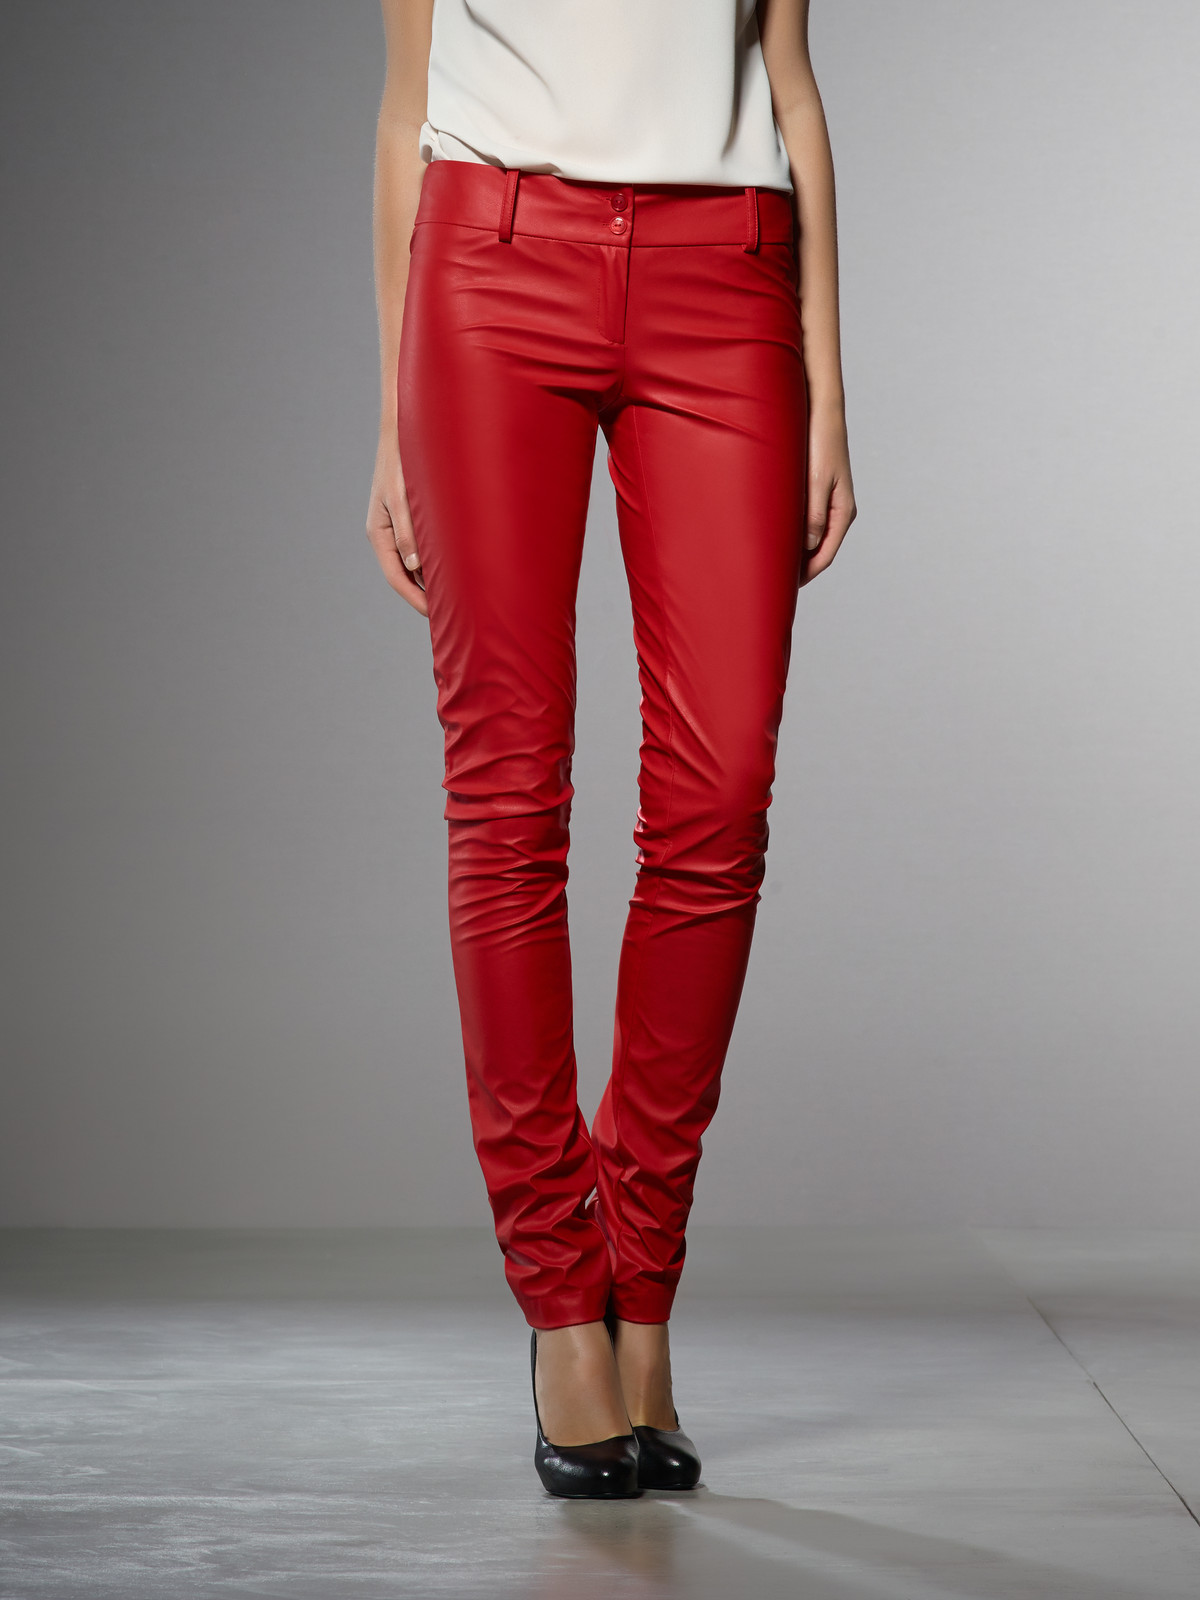 Patrizia Pepe Slim Eco Leather Trousers in Red (Rising Red) | Lyst